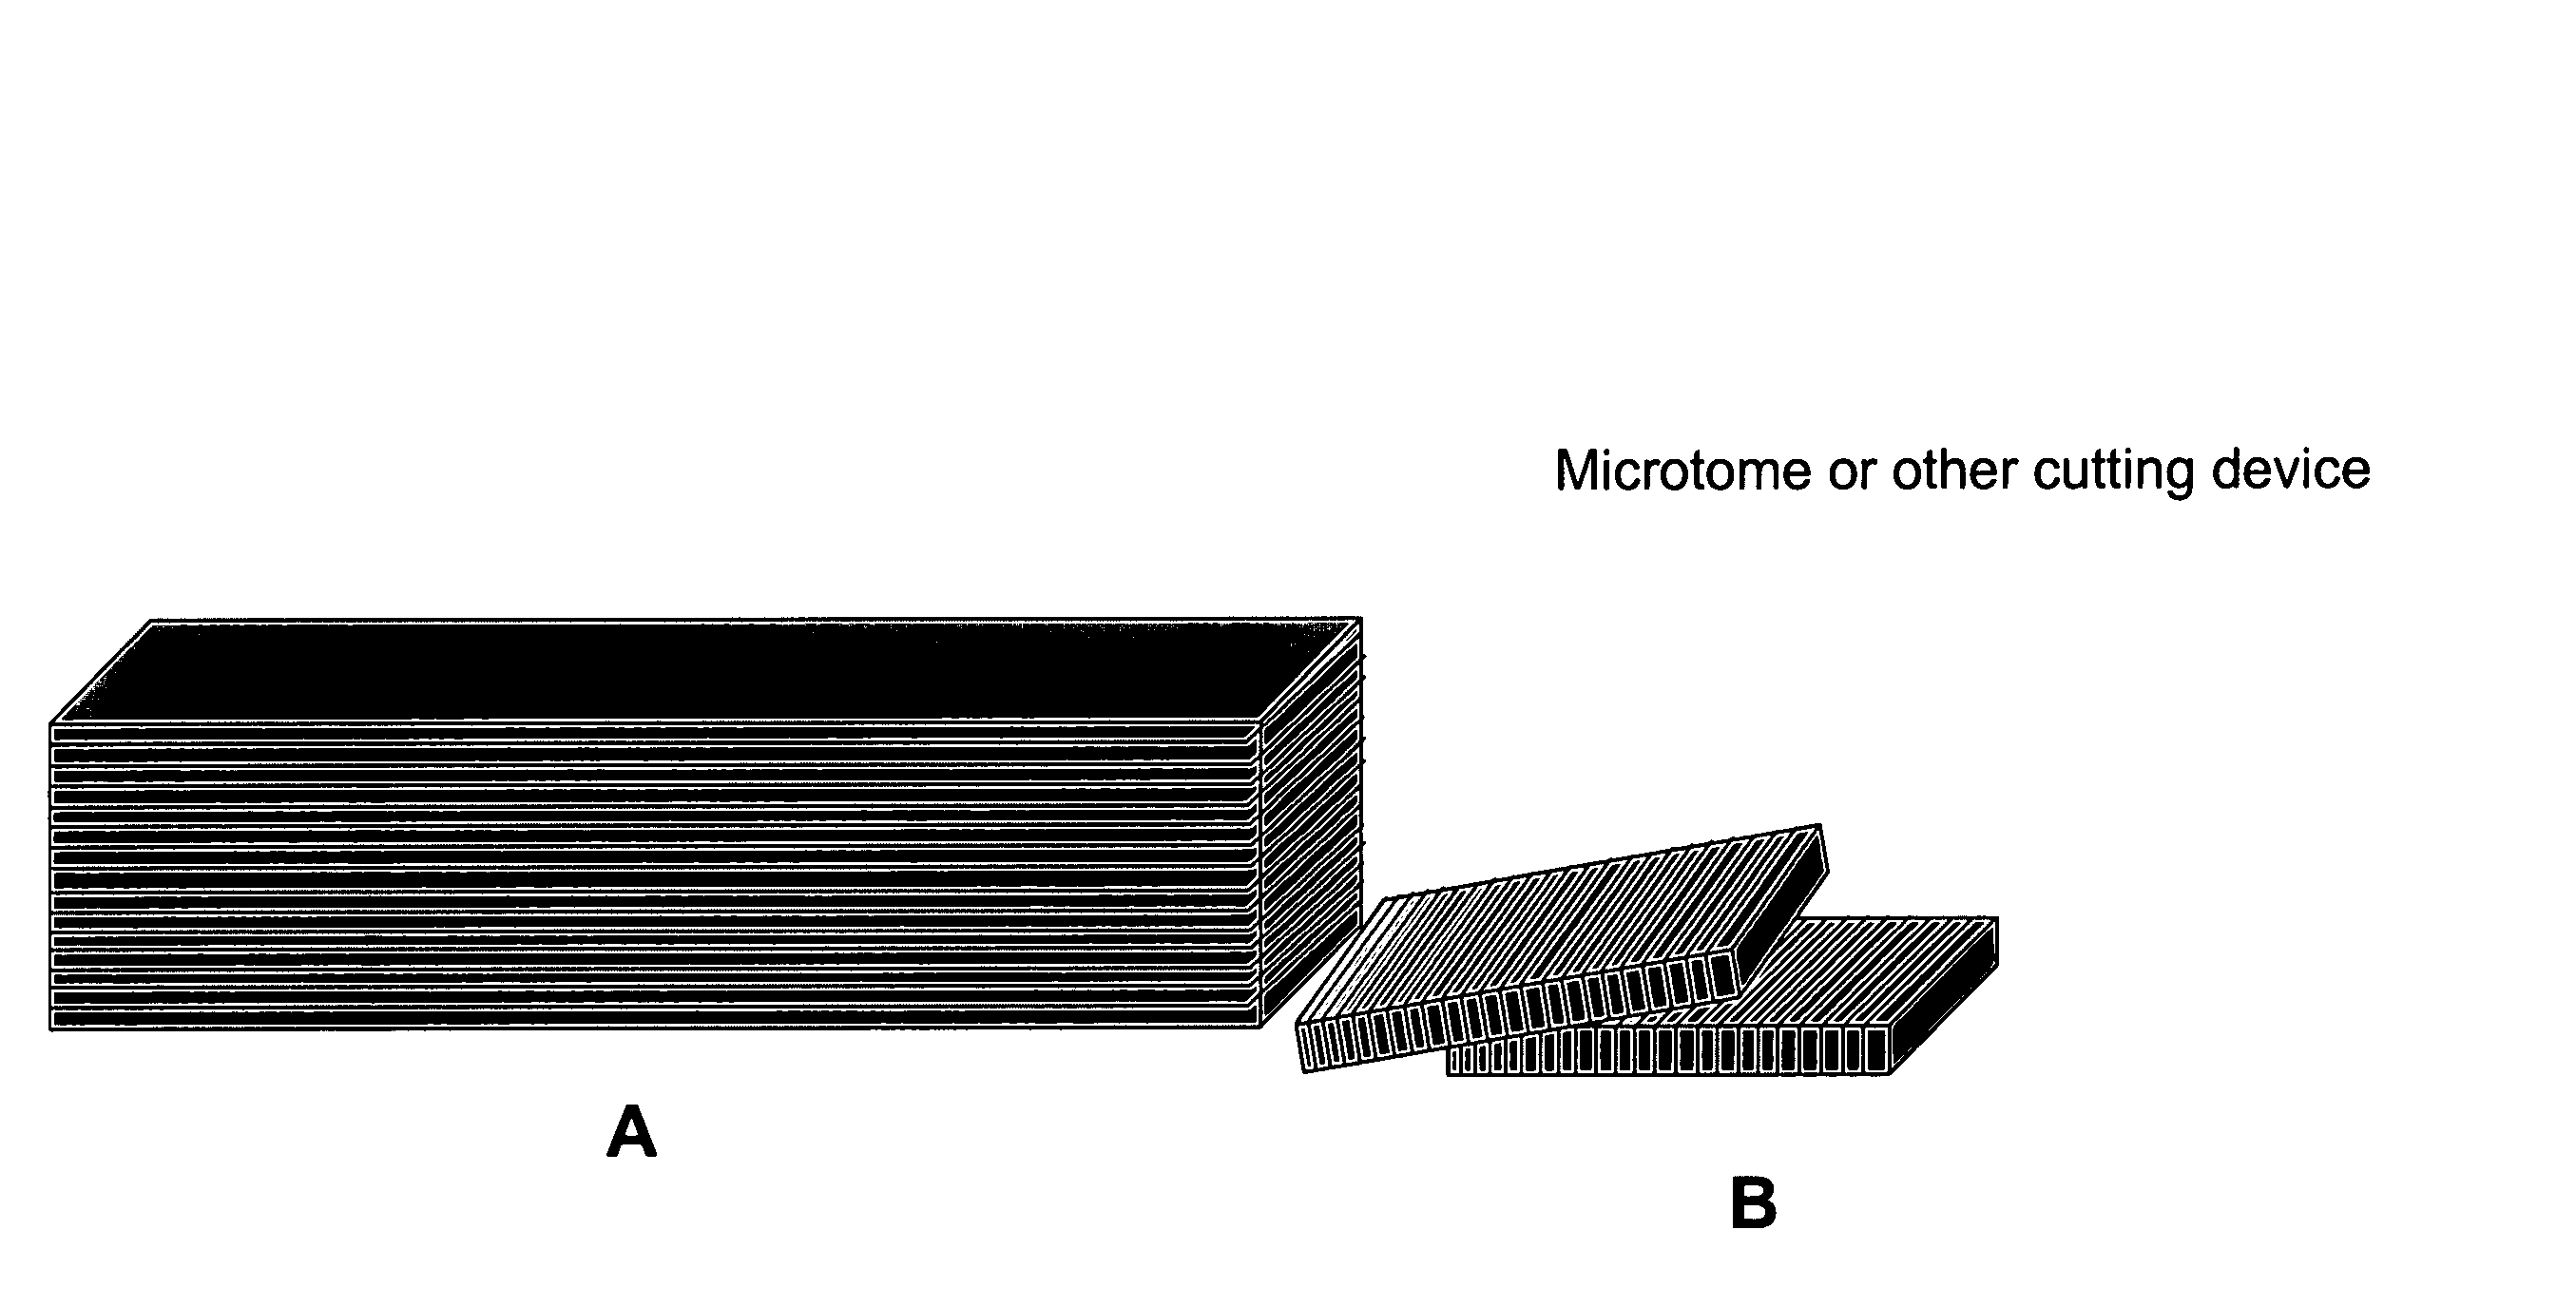 Self orienting micro plates of thermally conducting material as component in thermal paste or adhesive